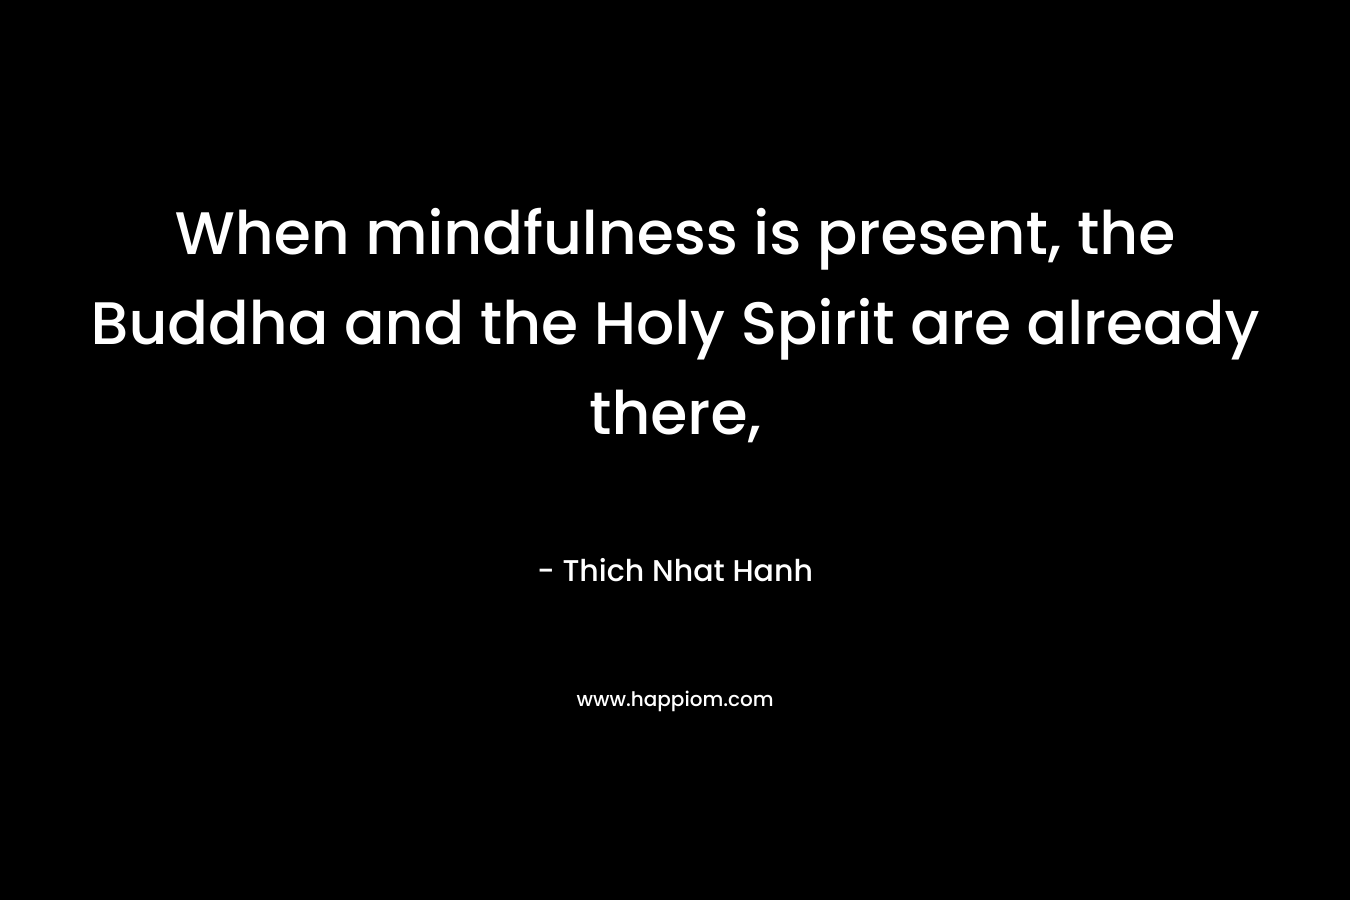 When mindfulness is present, the Buddha and the Holy Spirit are already there, – Thich Nhat Hanh